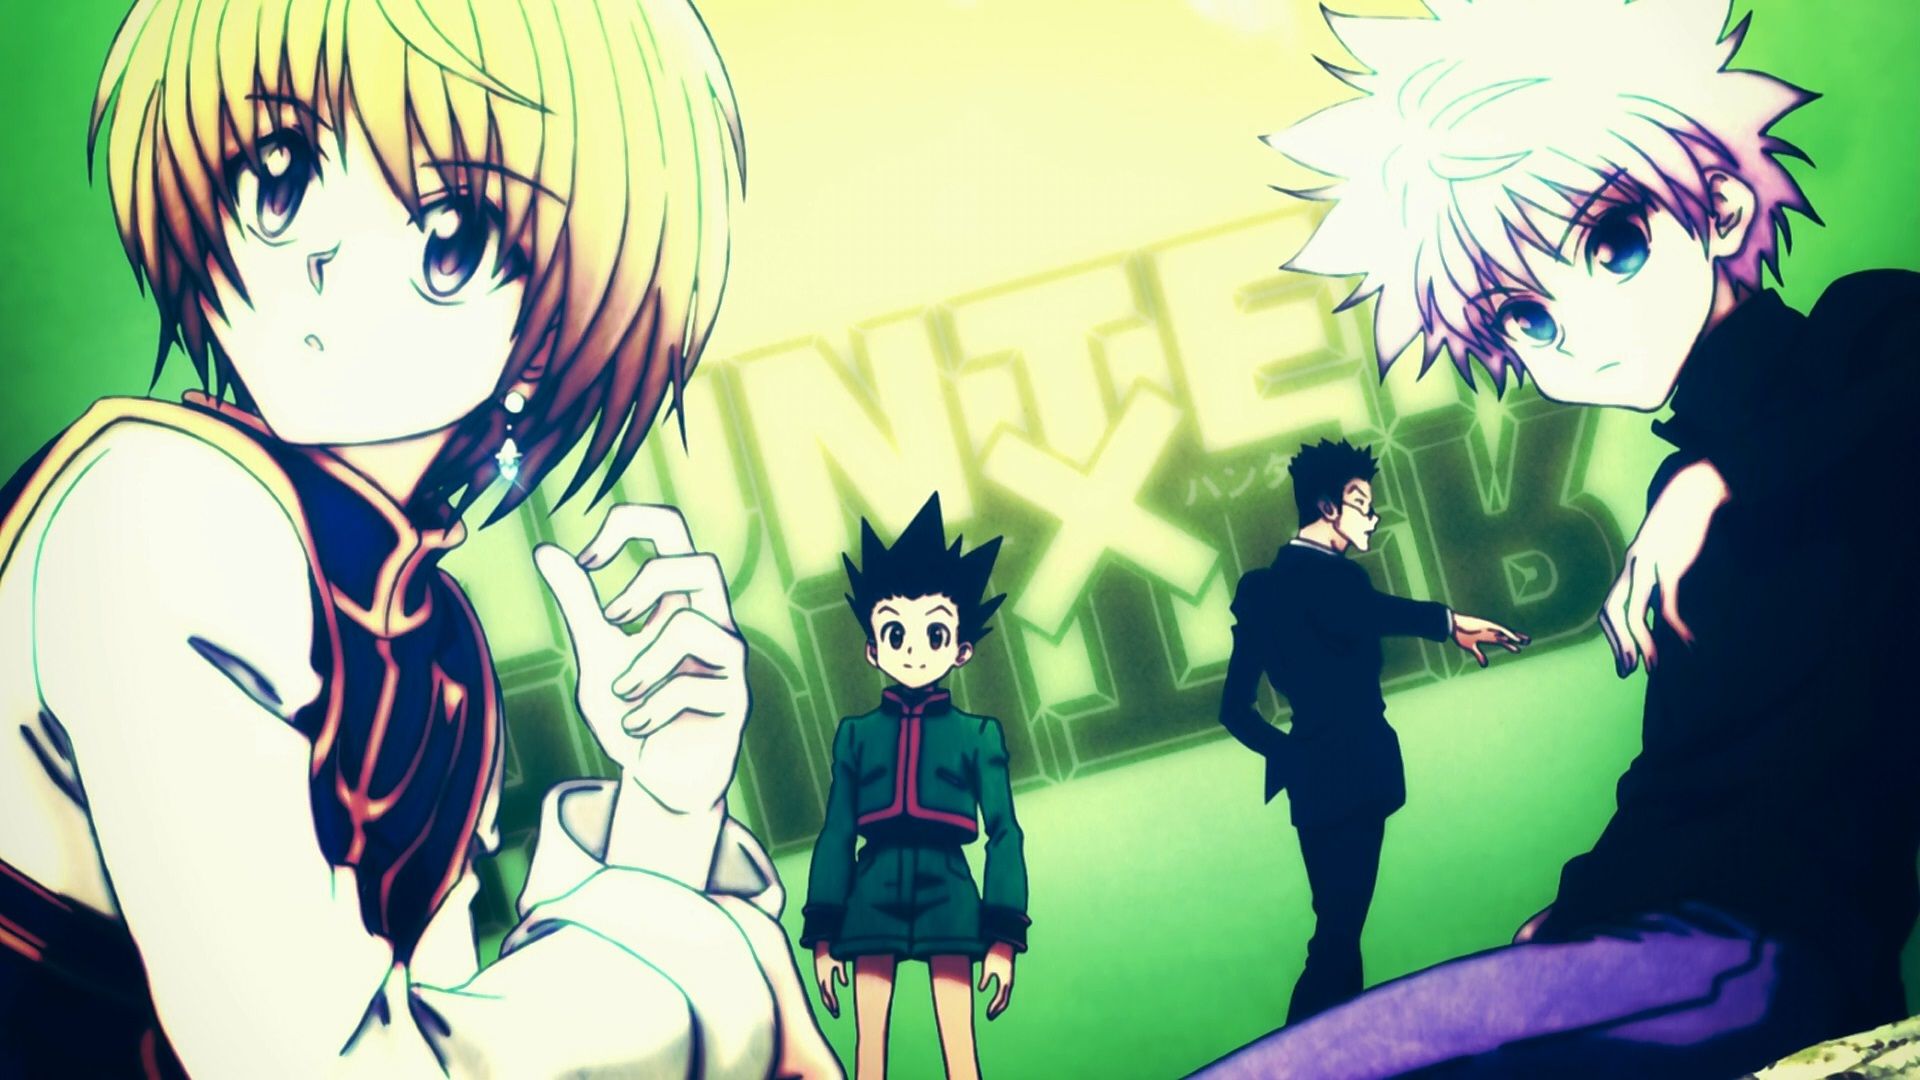 Hunter X Hunter Wallpapers High Quality Download Free